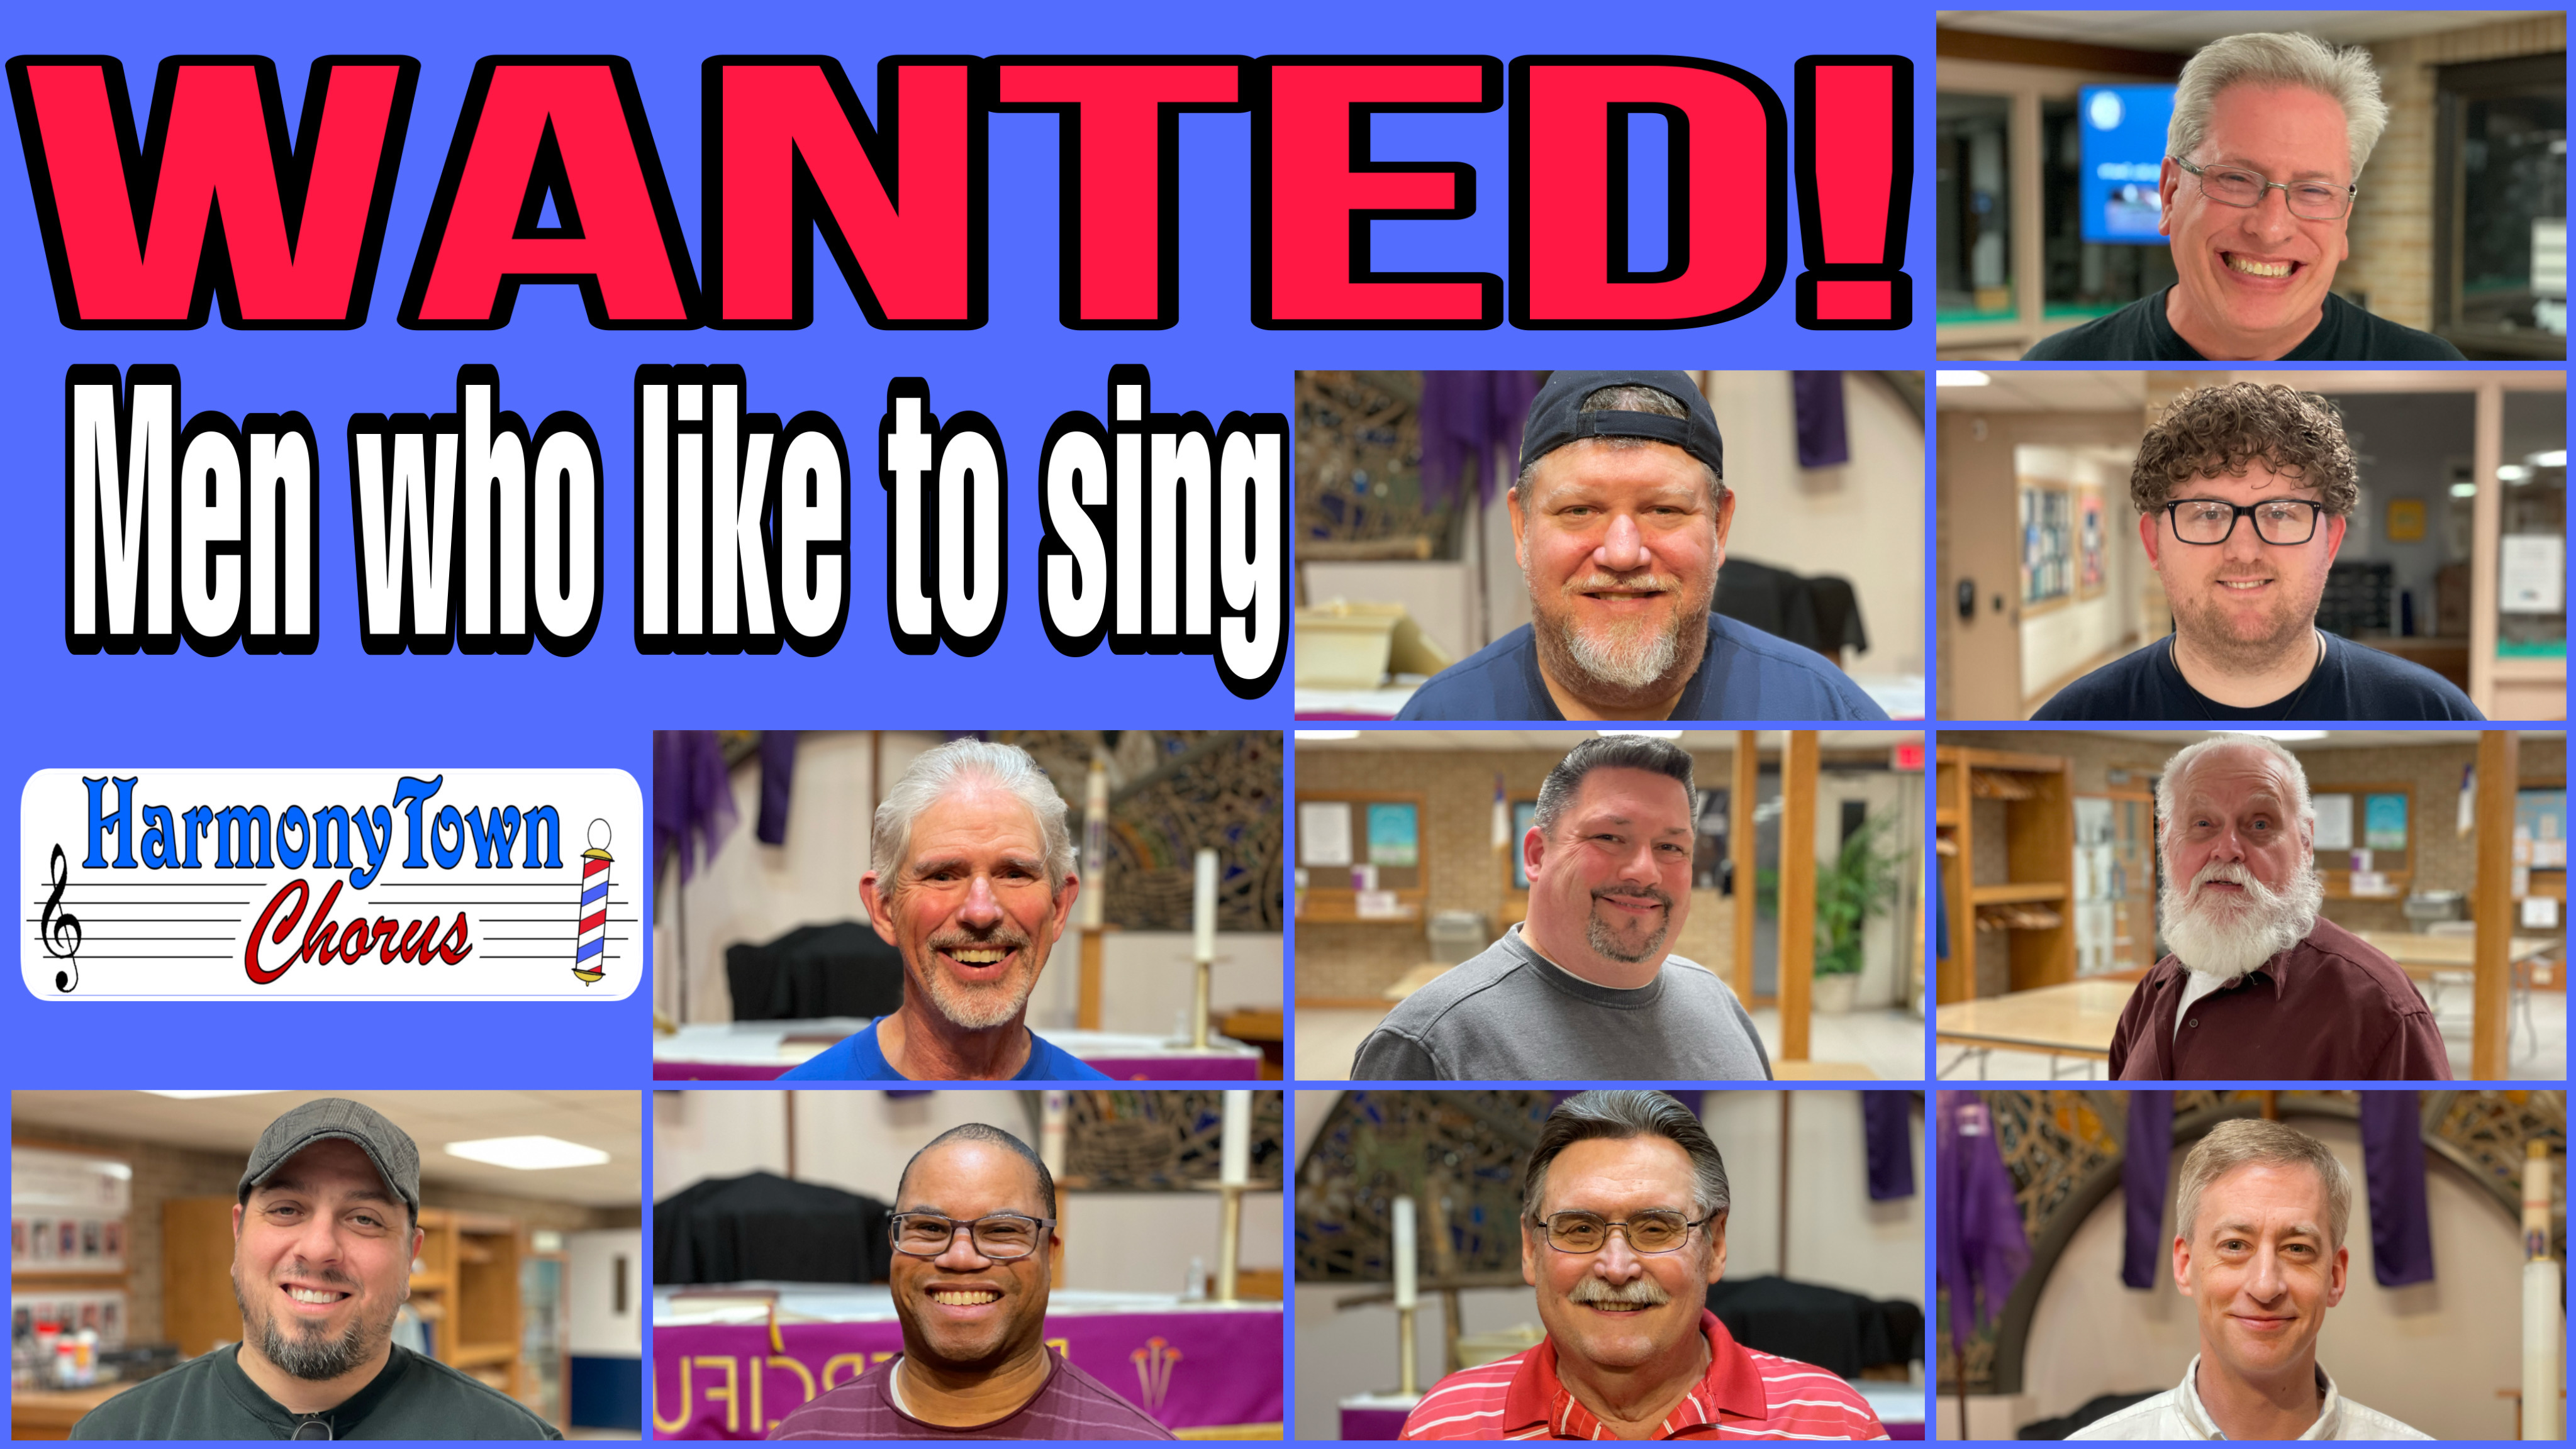 Guest Night - Men, come & sing with us!